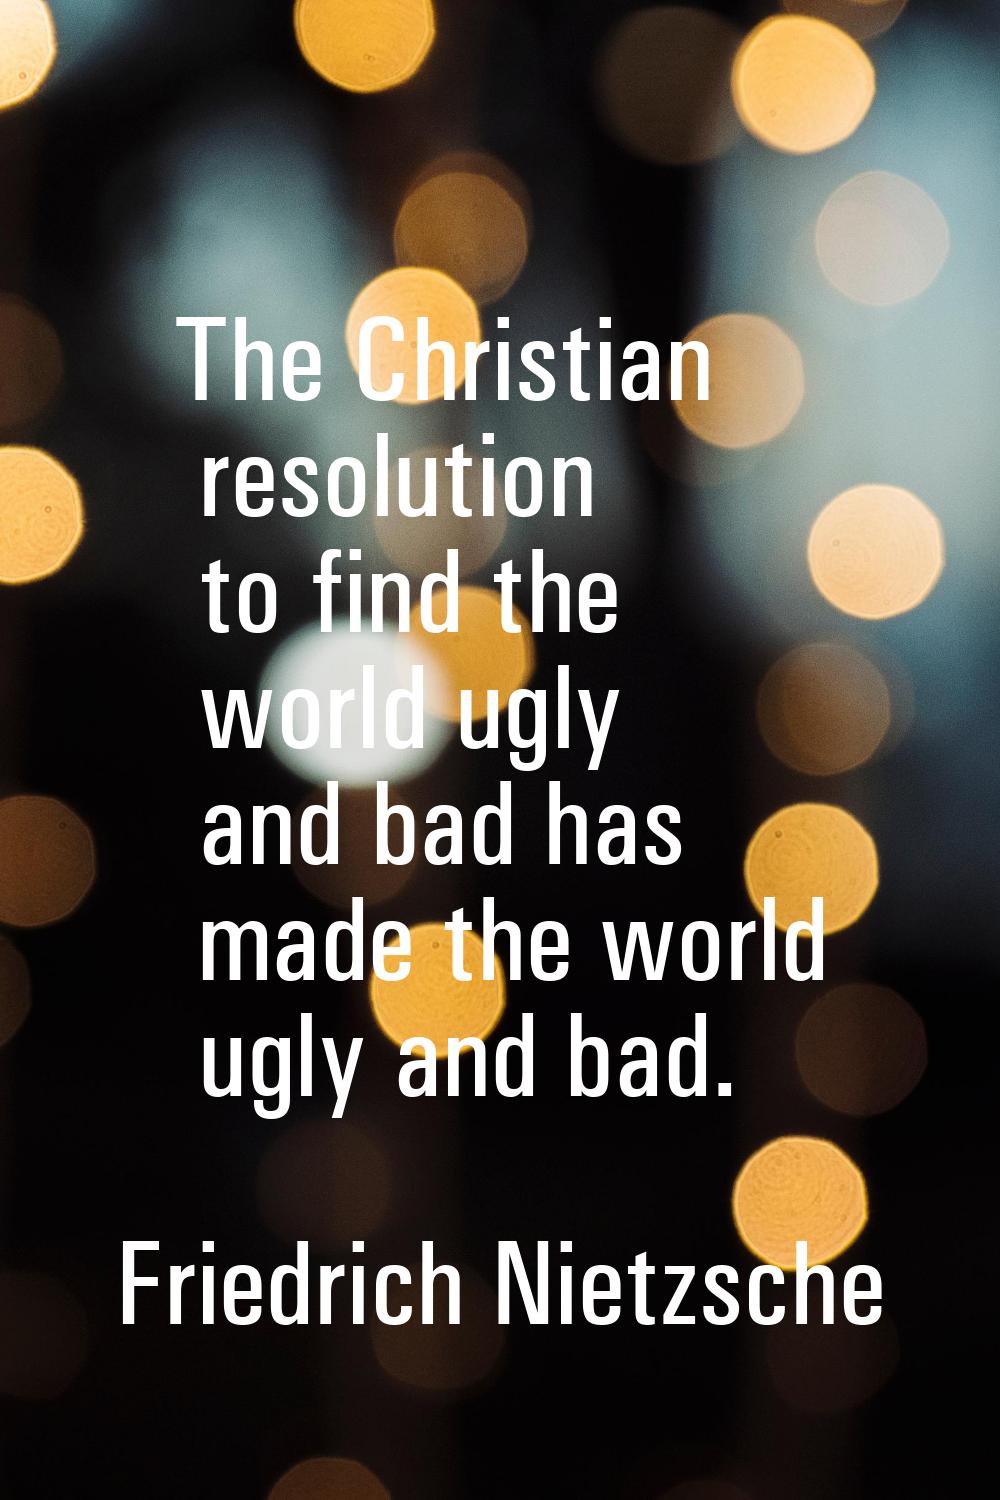 The Christian resolution to find the world ugly and bad has made the world ugly and bad.